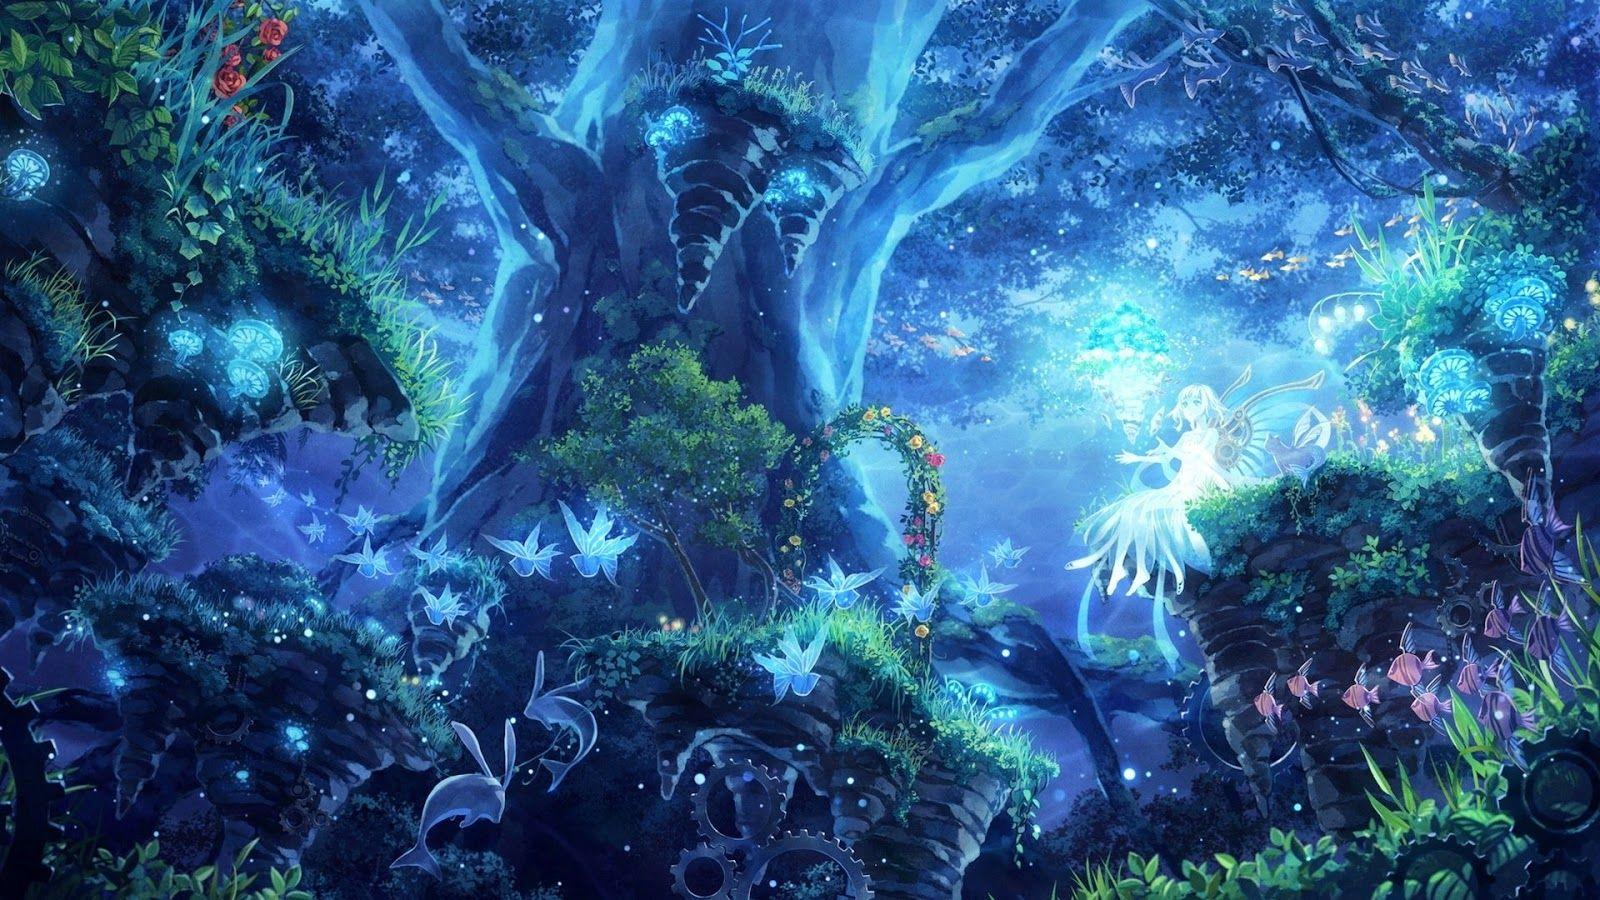 Fairy Forest at Night Wallpaper